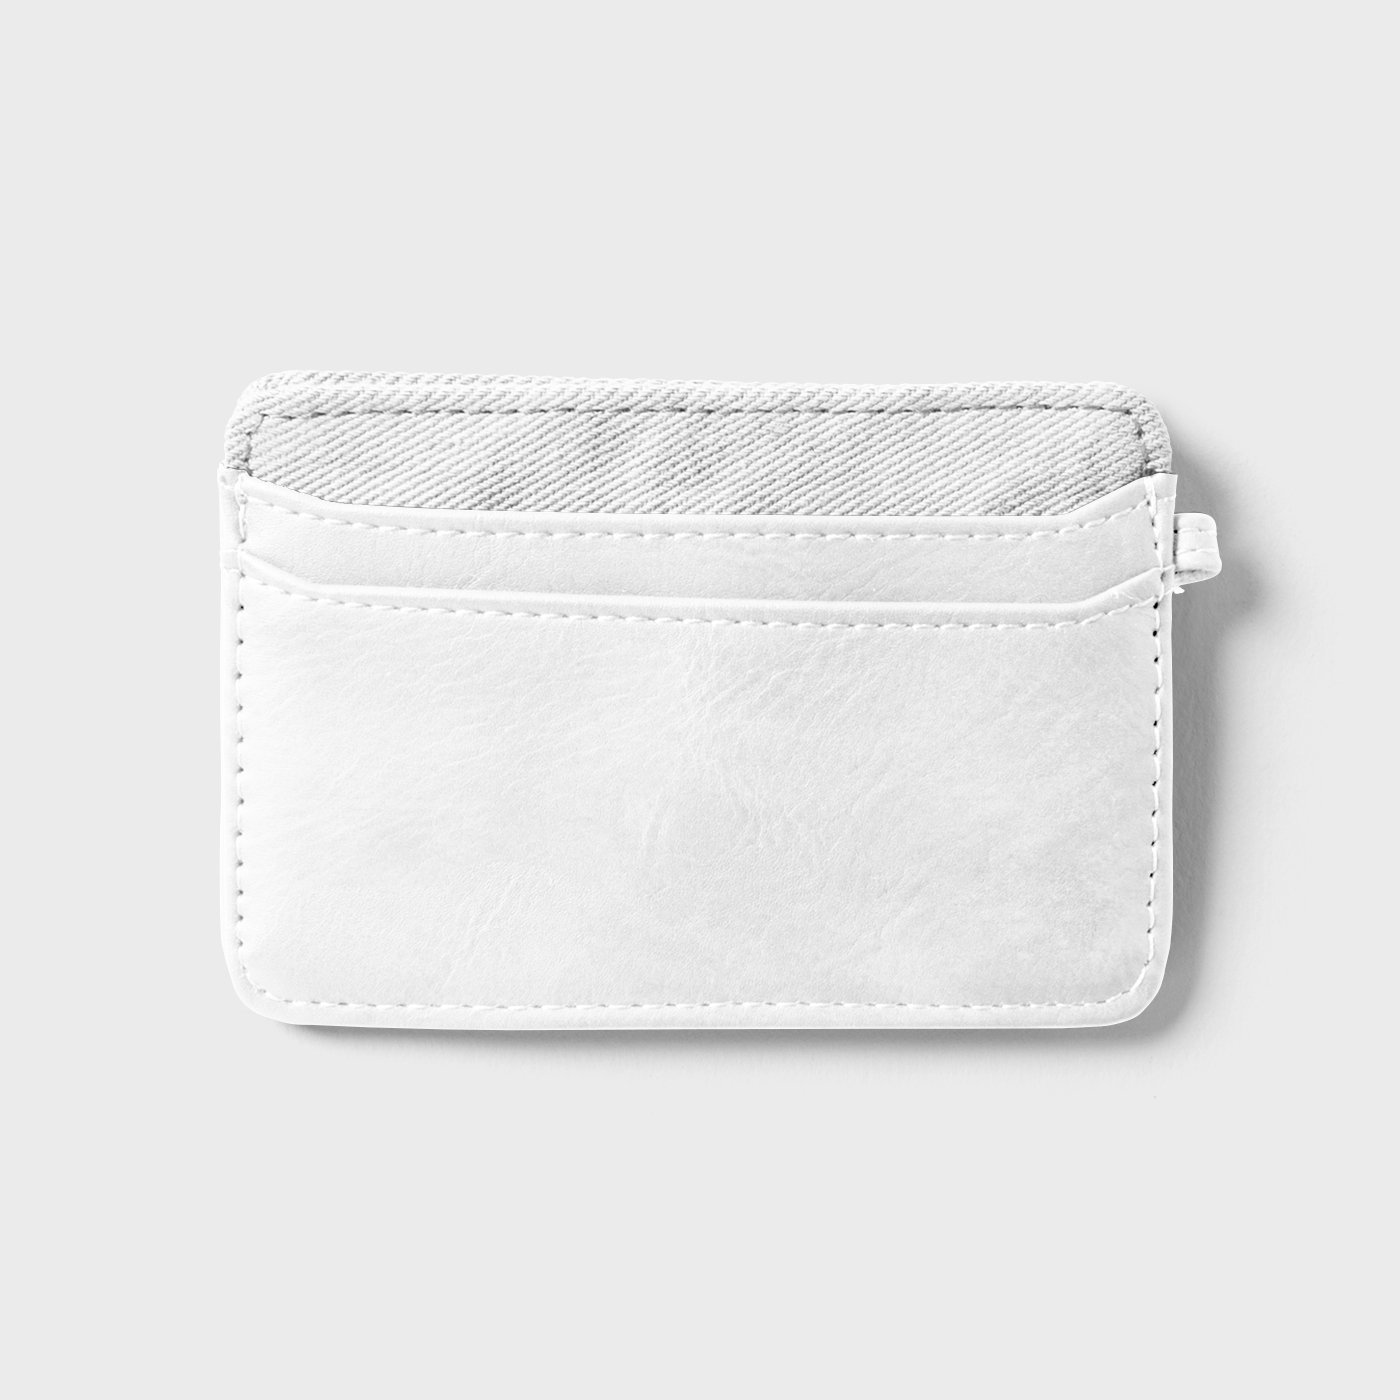 Front View of Small Leather Wallet Mockup FREE PSD